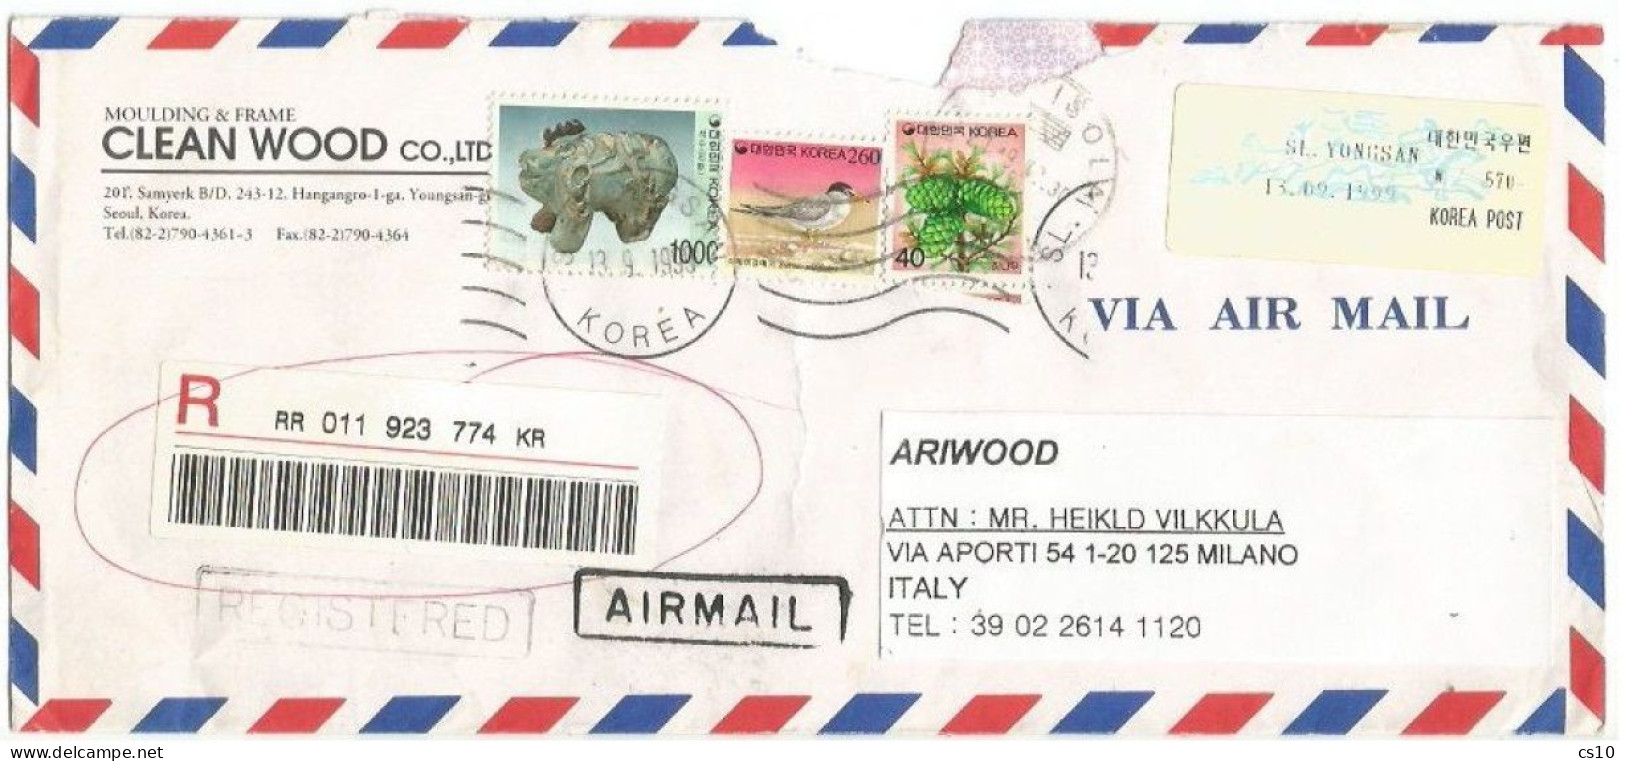 South Korea Registered Commerce Airmail Cover Youngsan 13sep1999 With FRAMA ATM Label 570w + 3 Stamps To Italy - Machine Labels [ATM]